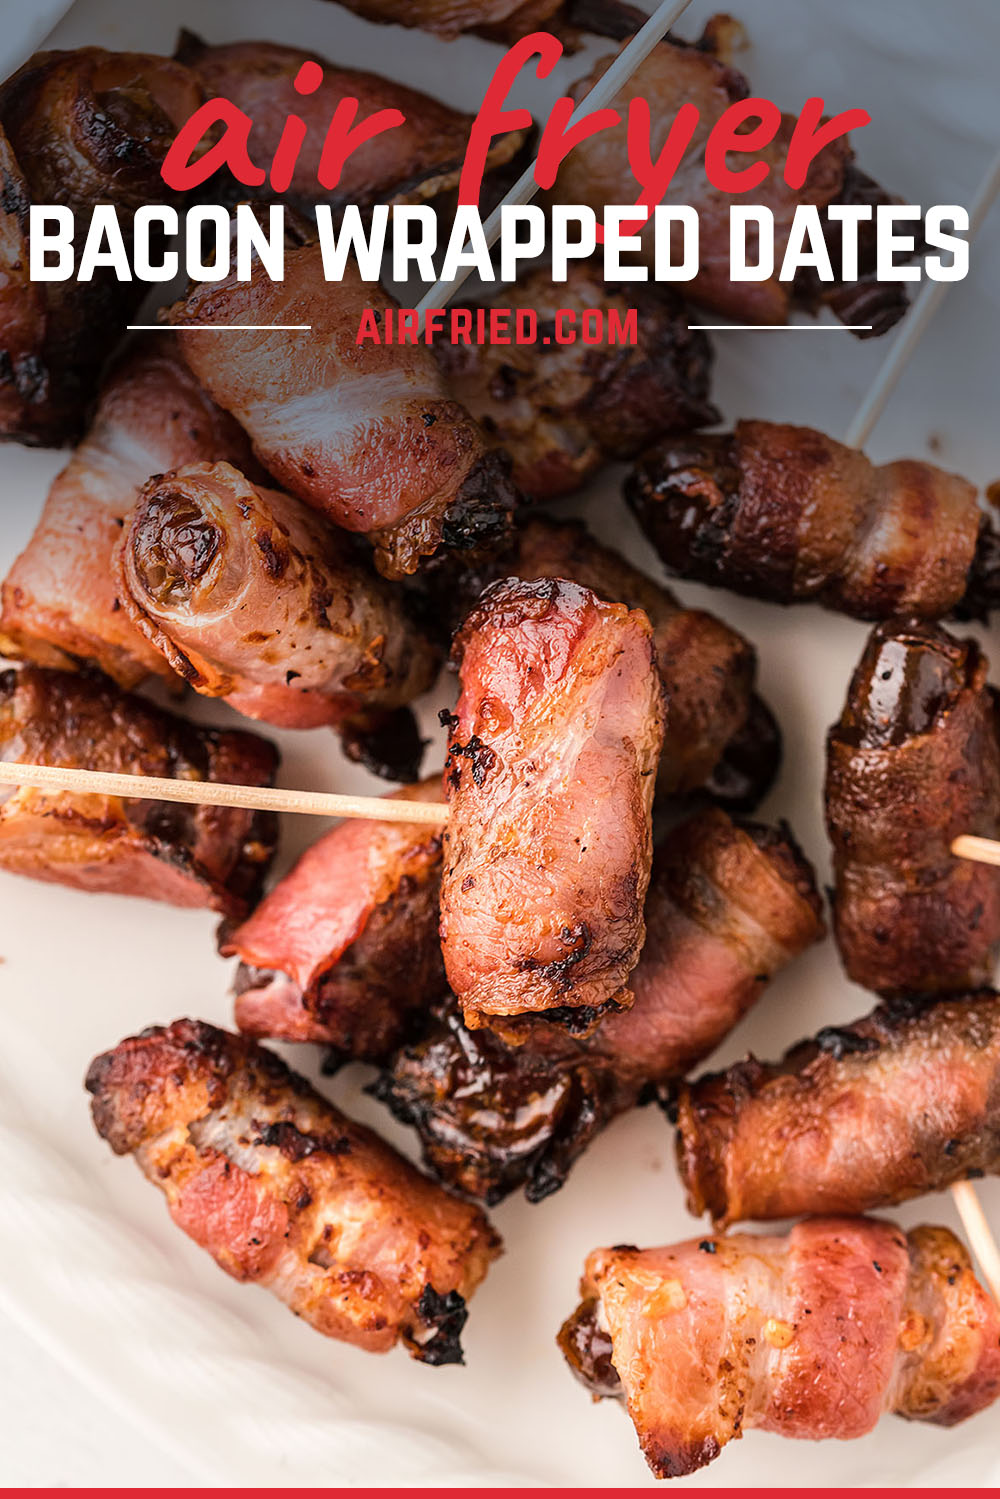 These sweet dates are air-fried and wrapped in salty bacon.  Makes an amazing appetizer! #airfryer #recipes #bacon